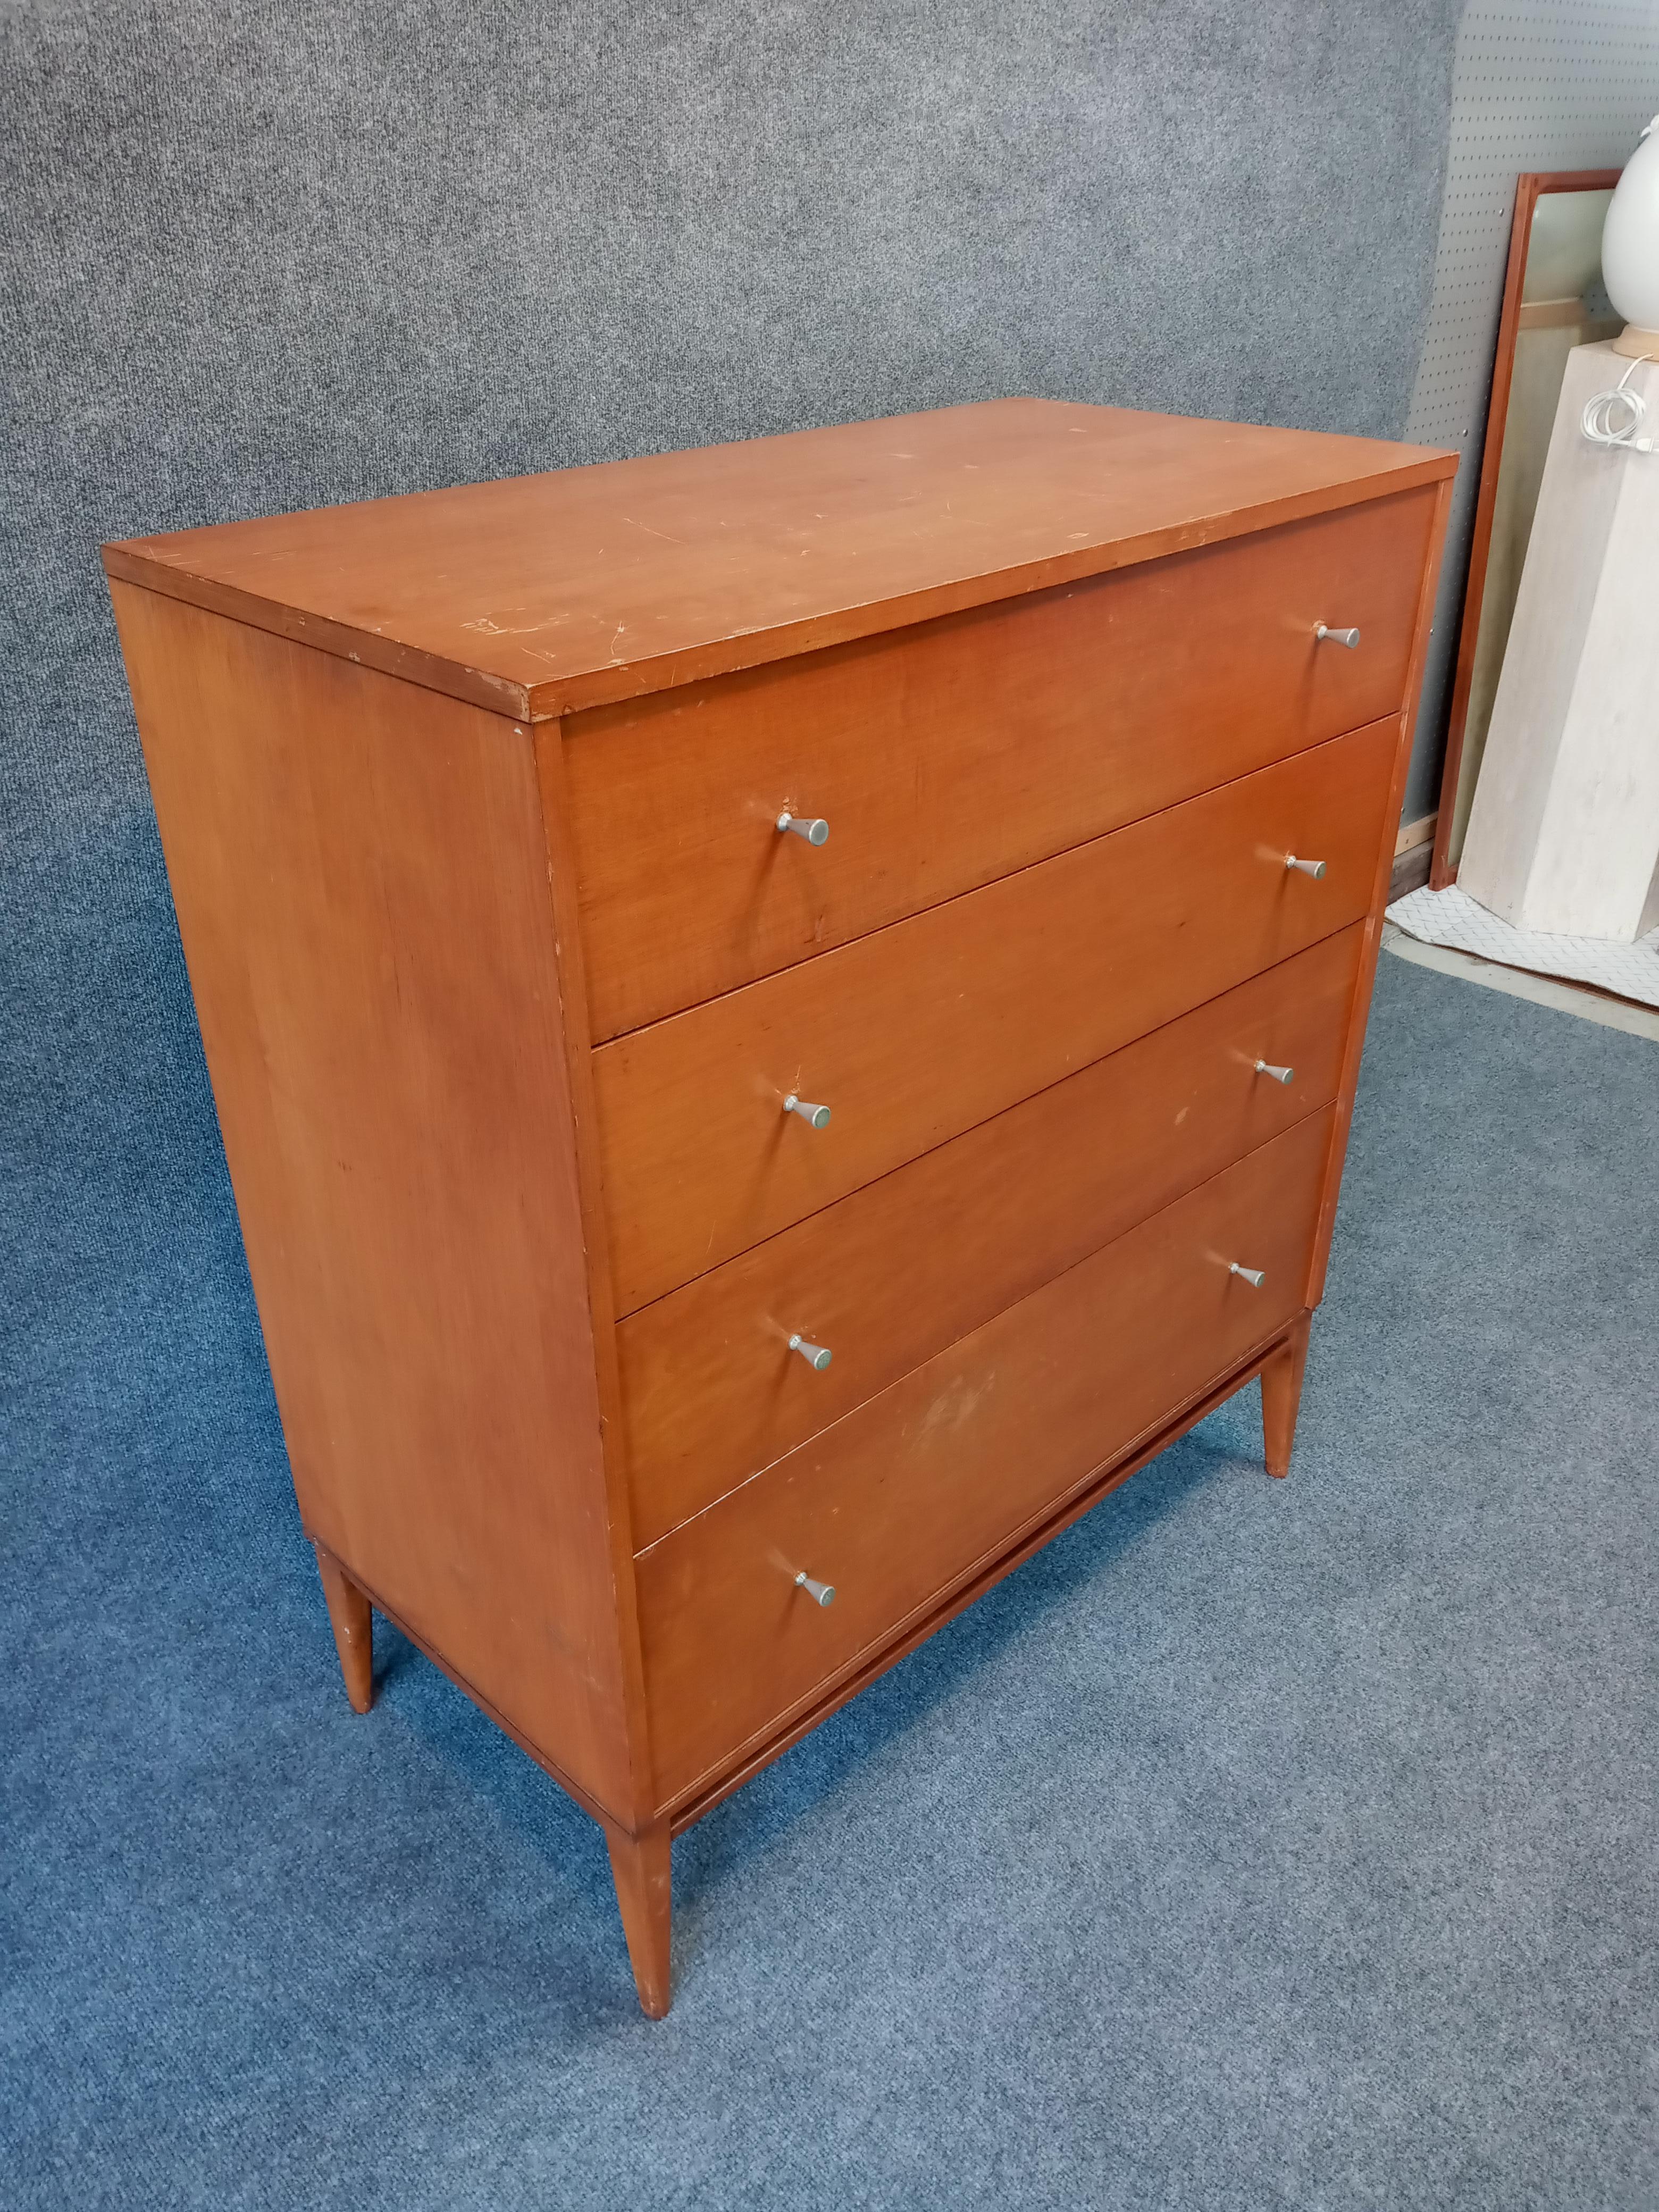 A practical and stylish Paul McCobb Planner Group for Winchendon solid maple tall 4-drawer dresser with original finish intact. All drawers work well, with clean interiors. No breaks or repairs. Original finish shows age-appropriate scuffs,